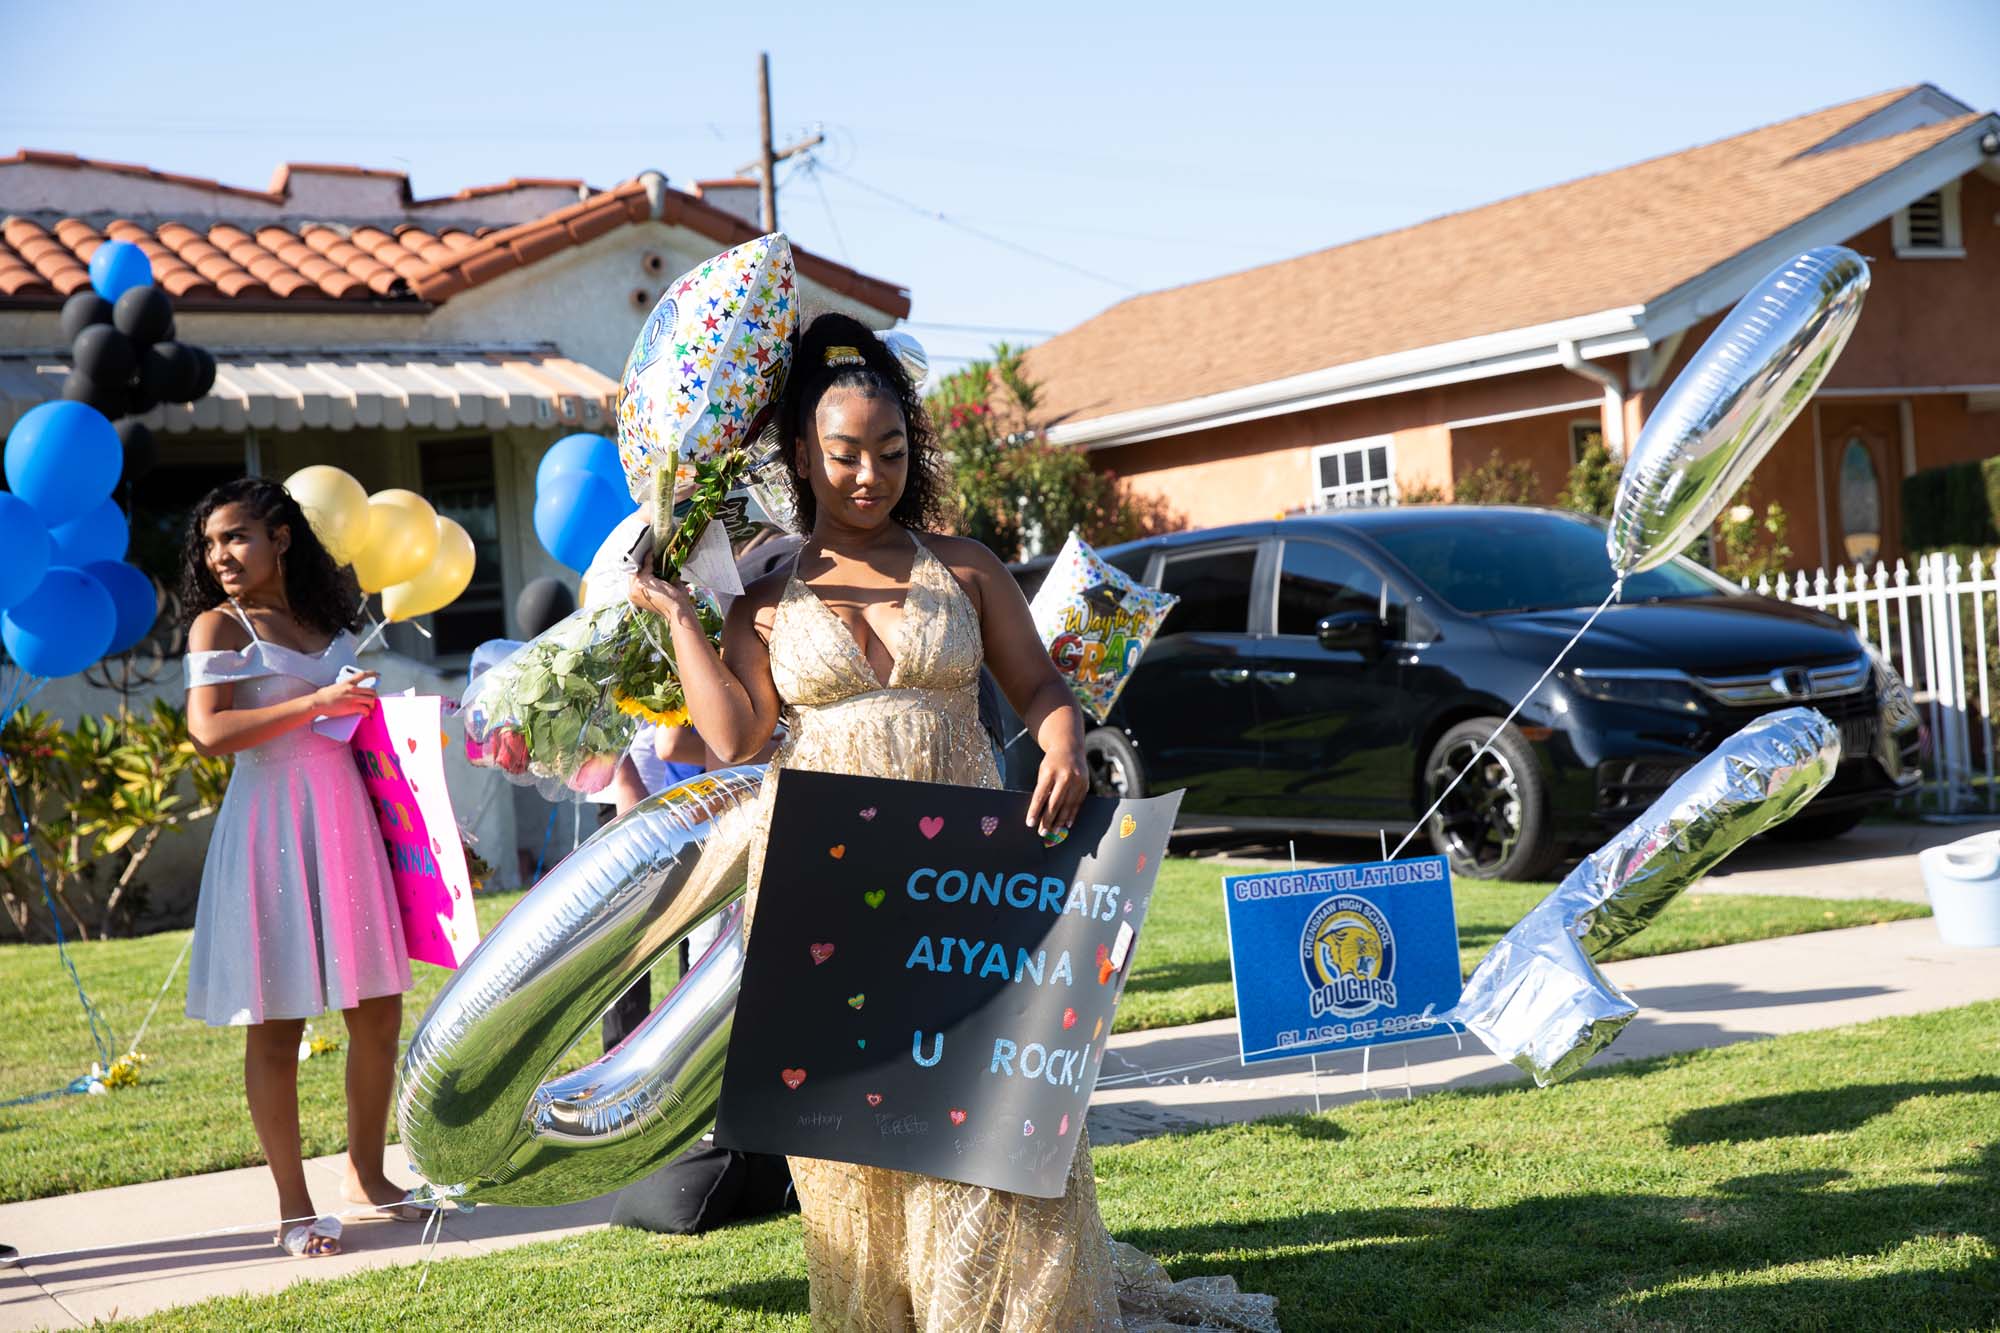 Carloads of family and friends wave, whistle and shower Aiyana Lopez-Spears with love, gifts and balloons in a drive-by party to celebrate her graduation from Crenshaw High School.